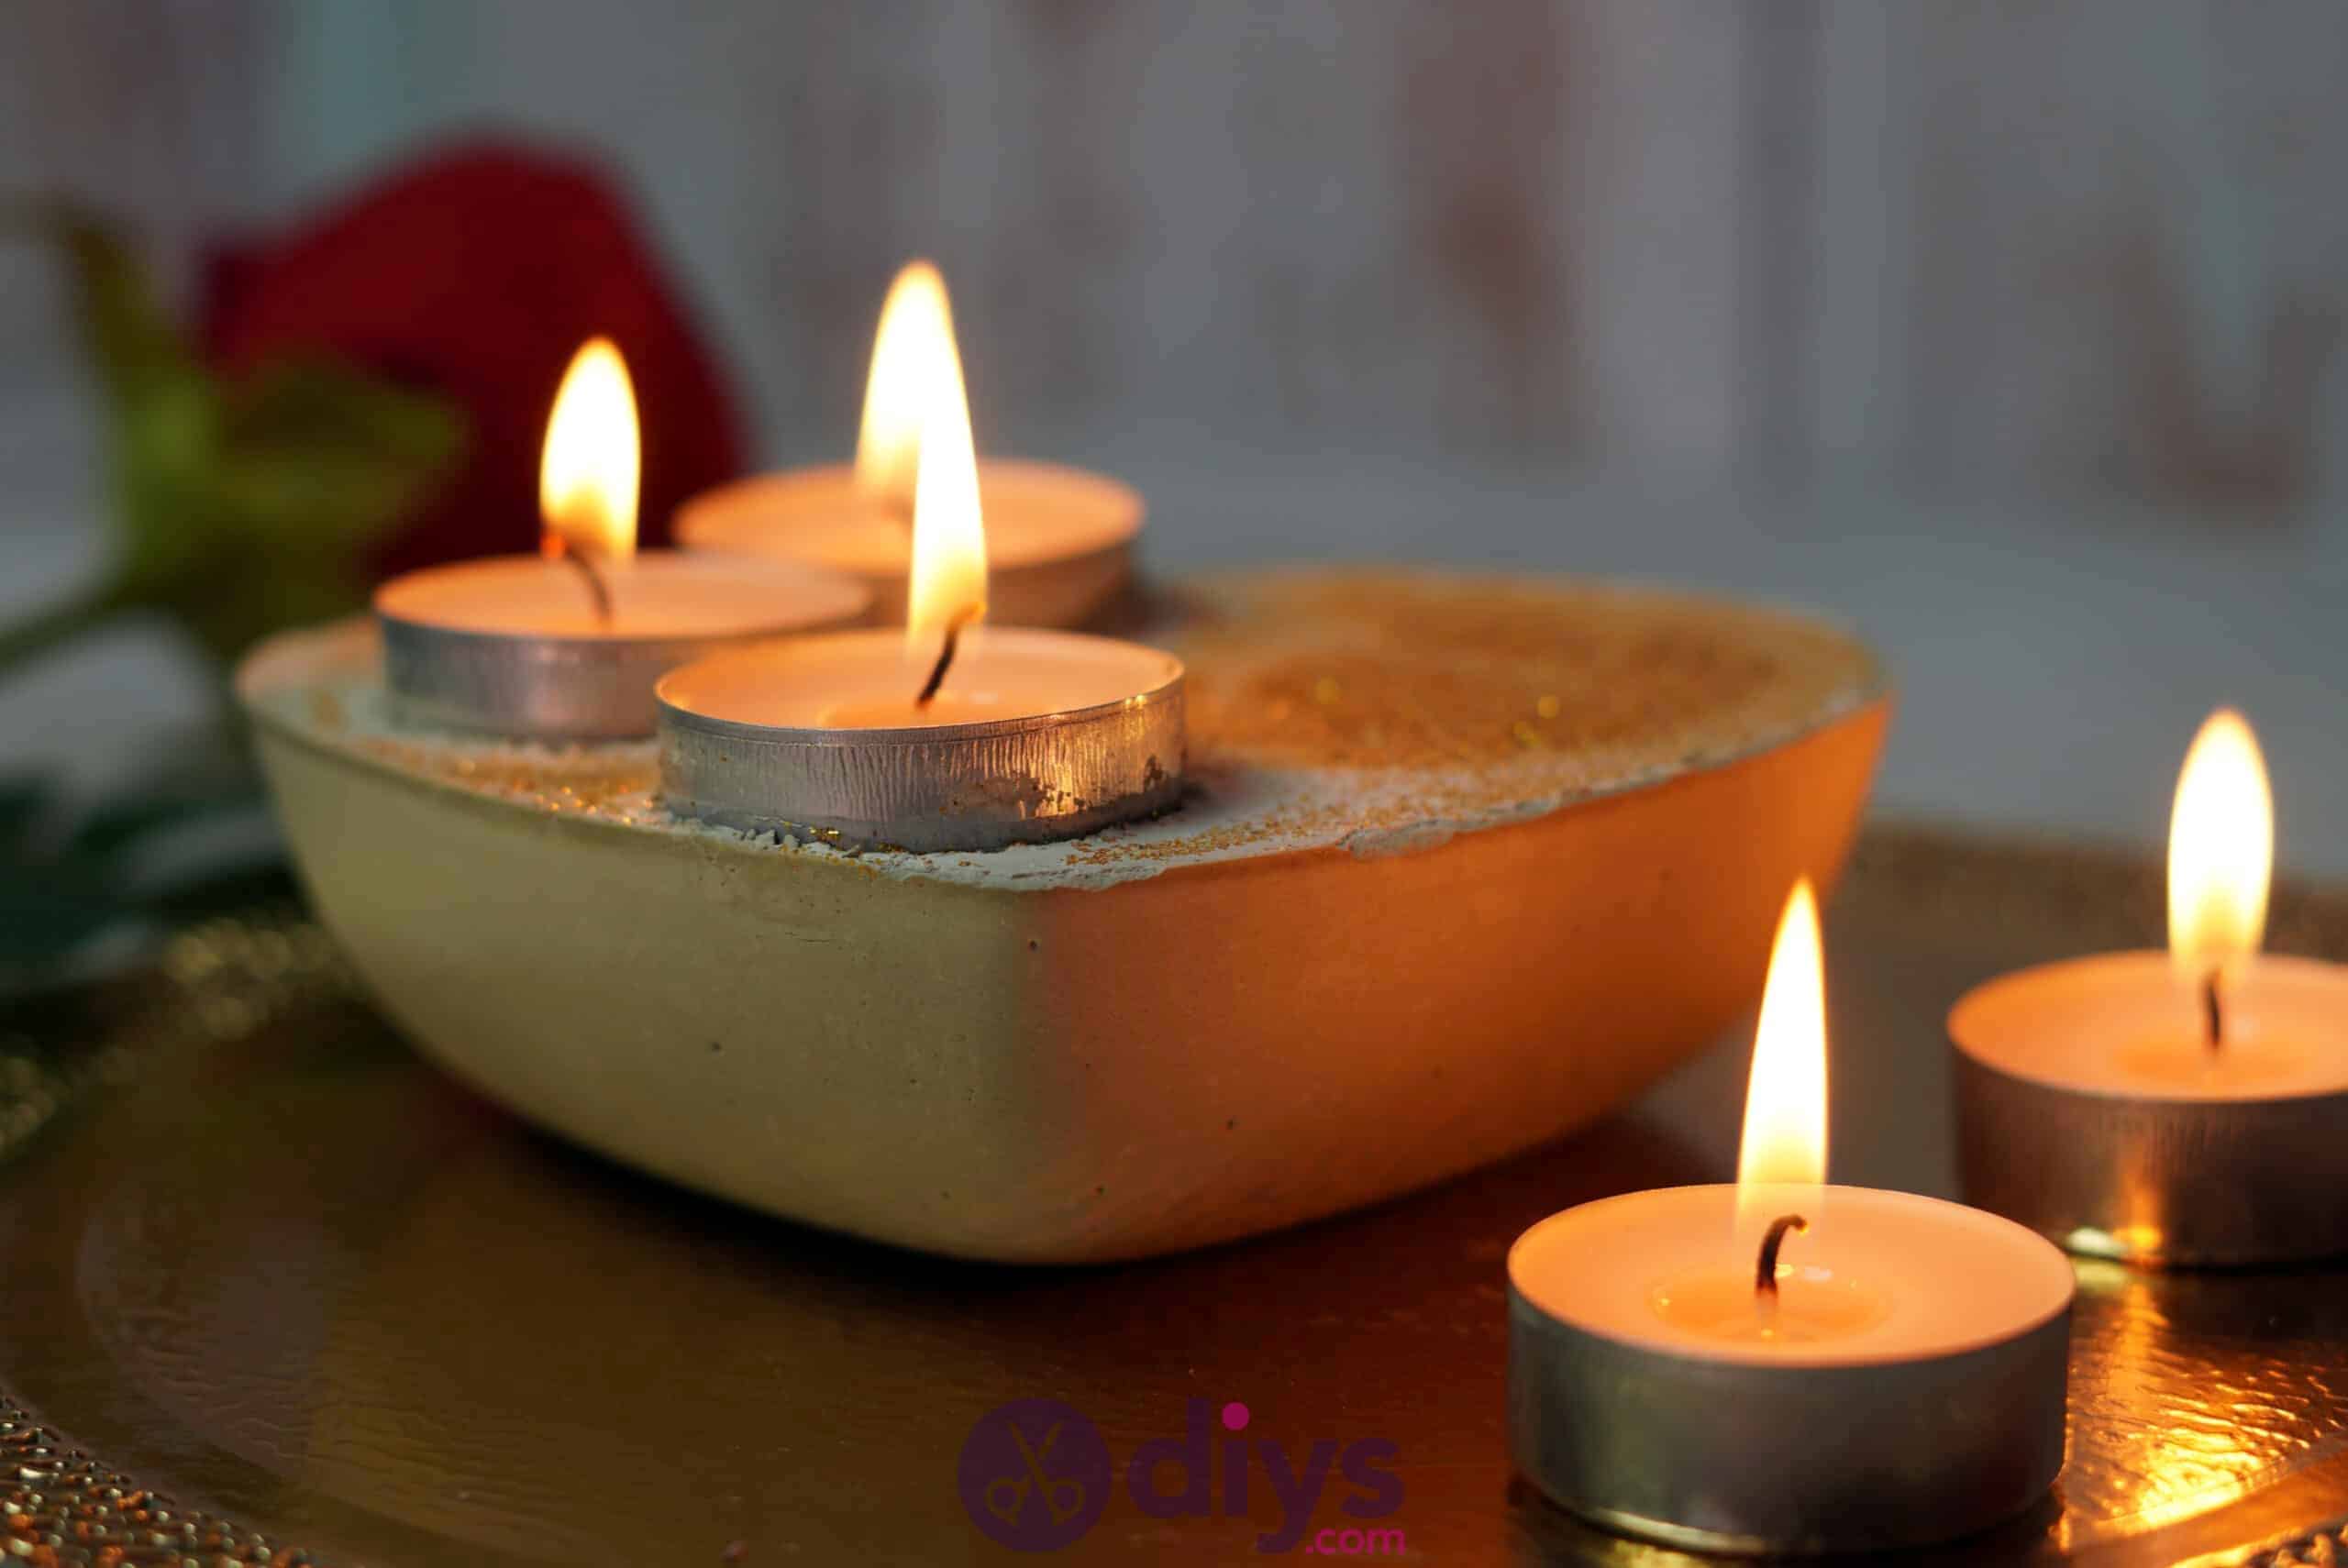 Diy concrete heart candle holder project